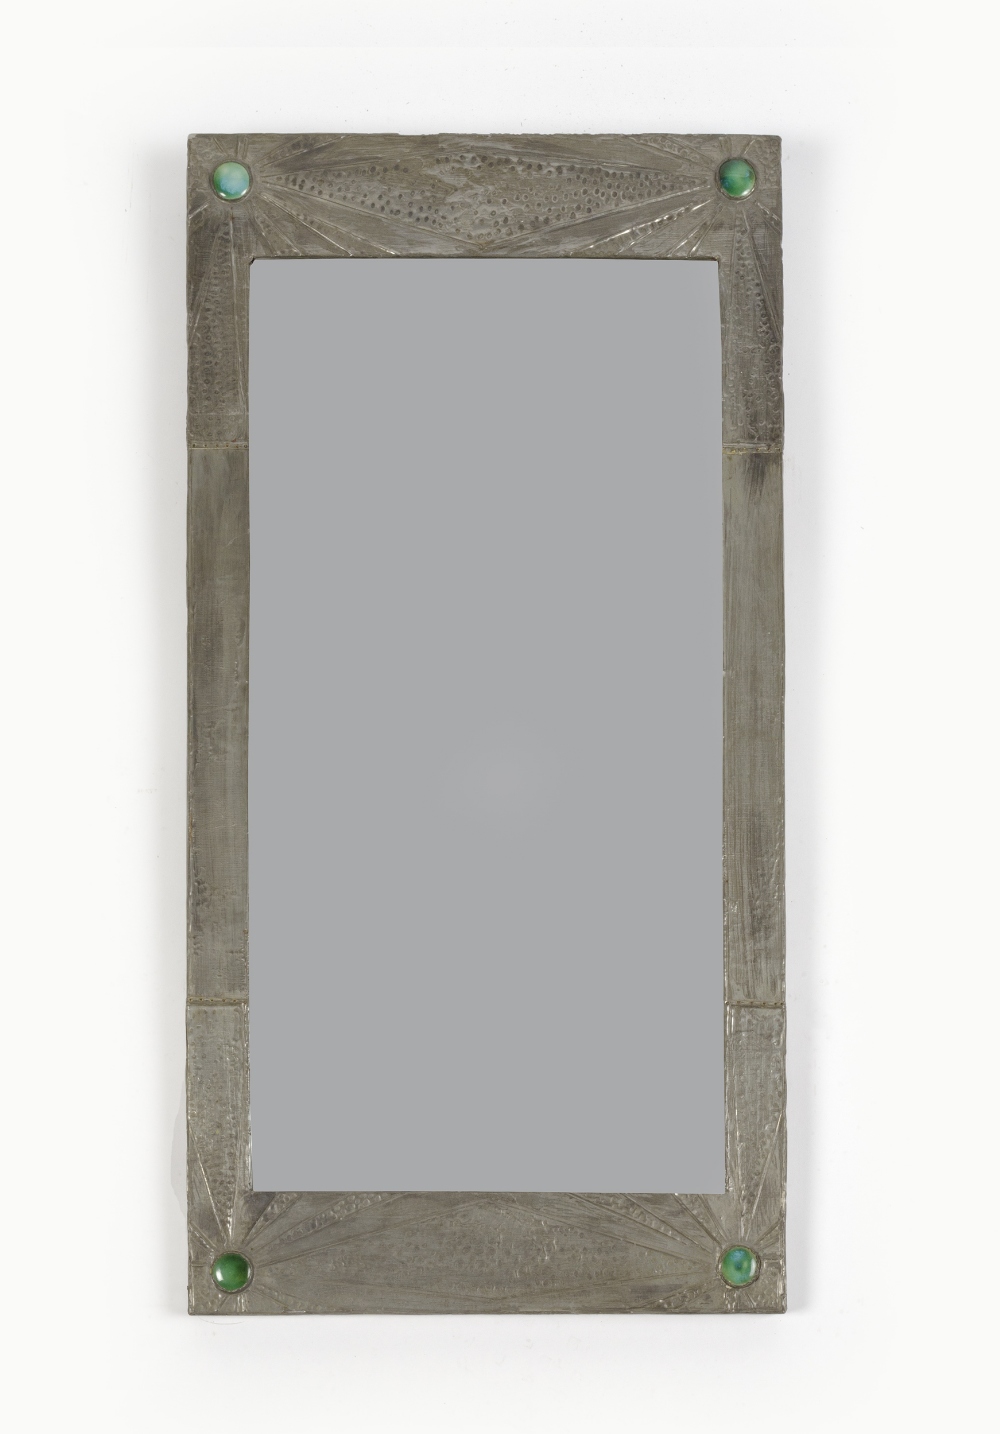 Glasgow School mirror the pewter frame with inset enamelled Ruskin type ceramic roundels, unmarked